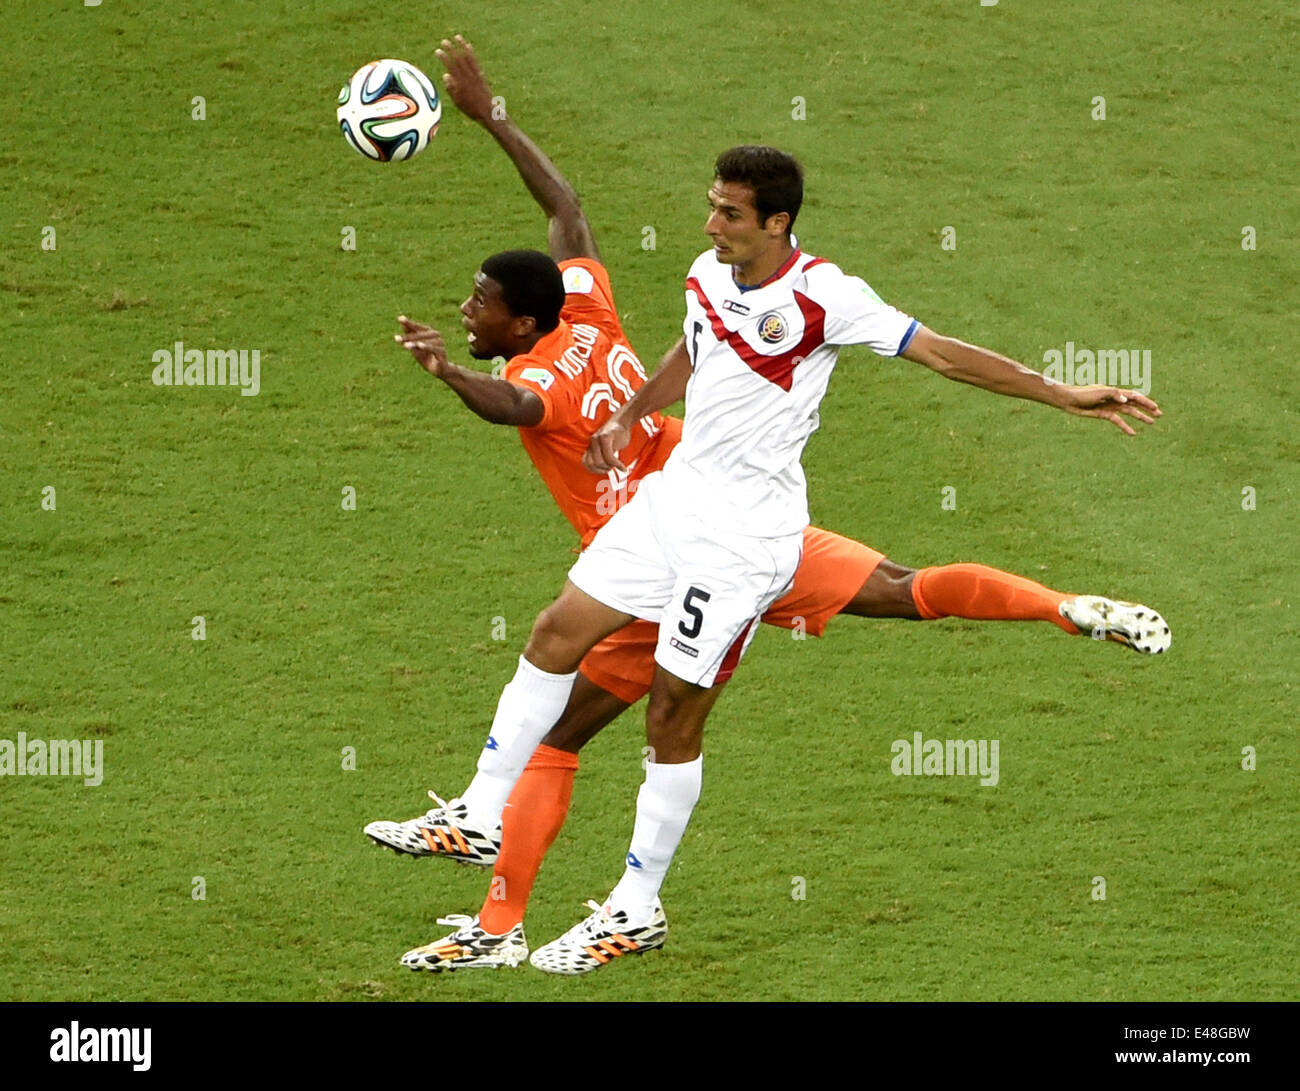 Salvador, Brazil. 5th July, 2014. Netherlands' Georginio Wijnaldum (L) vies with Costa Rica's Celso Borges during a quarter-finals match between Netherlands and Costa Rica of 2014 FIFA World Cup at the Arena Fonte Nova Stadium in Salvador, Brazil, on July 5, 2014. Credit:  Yang Lei/Xinhua/Alamy Live News Stock Photo